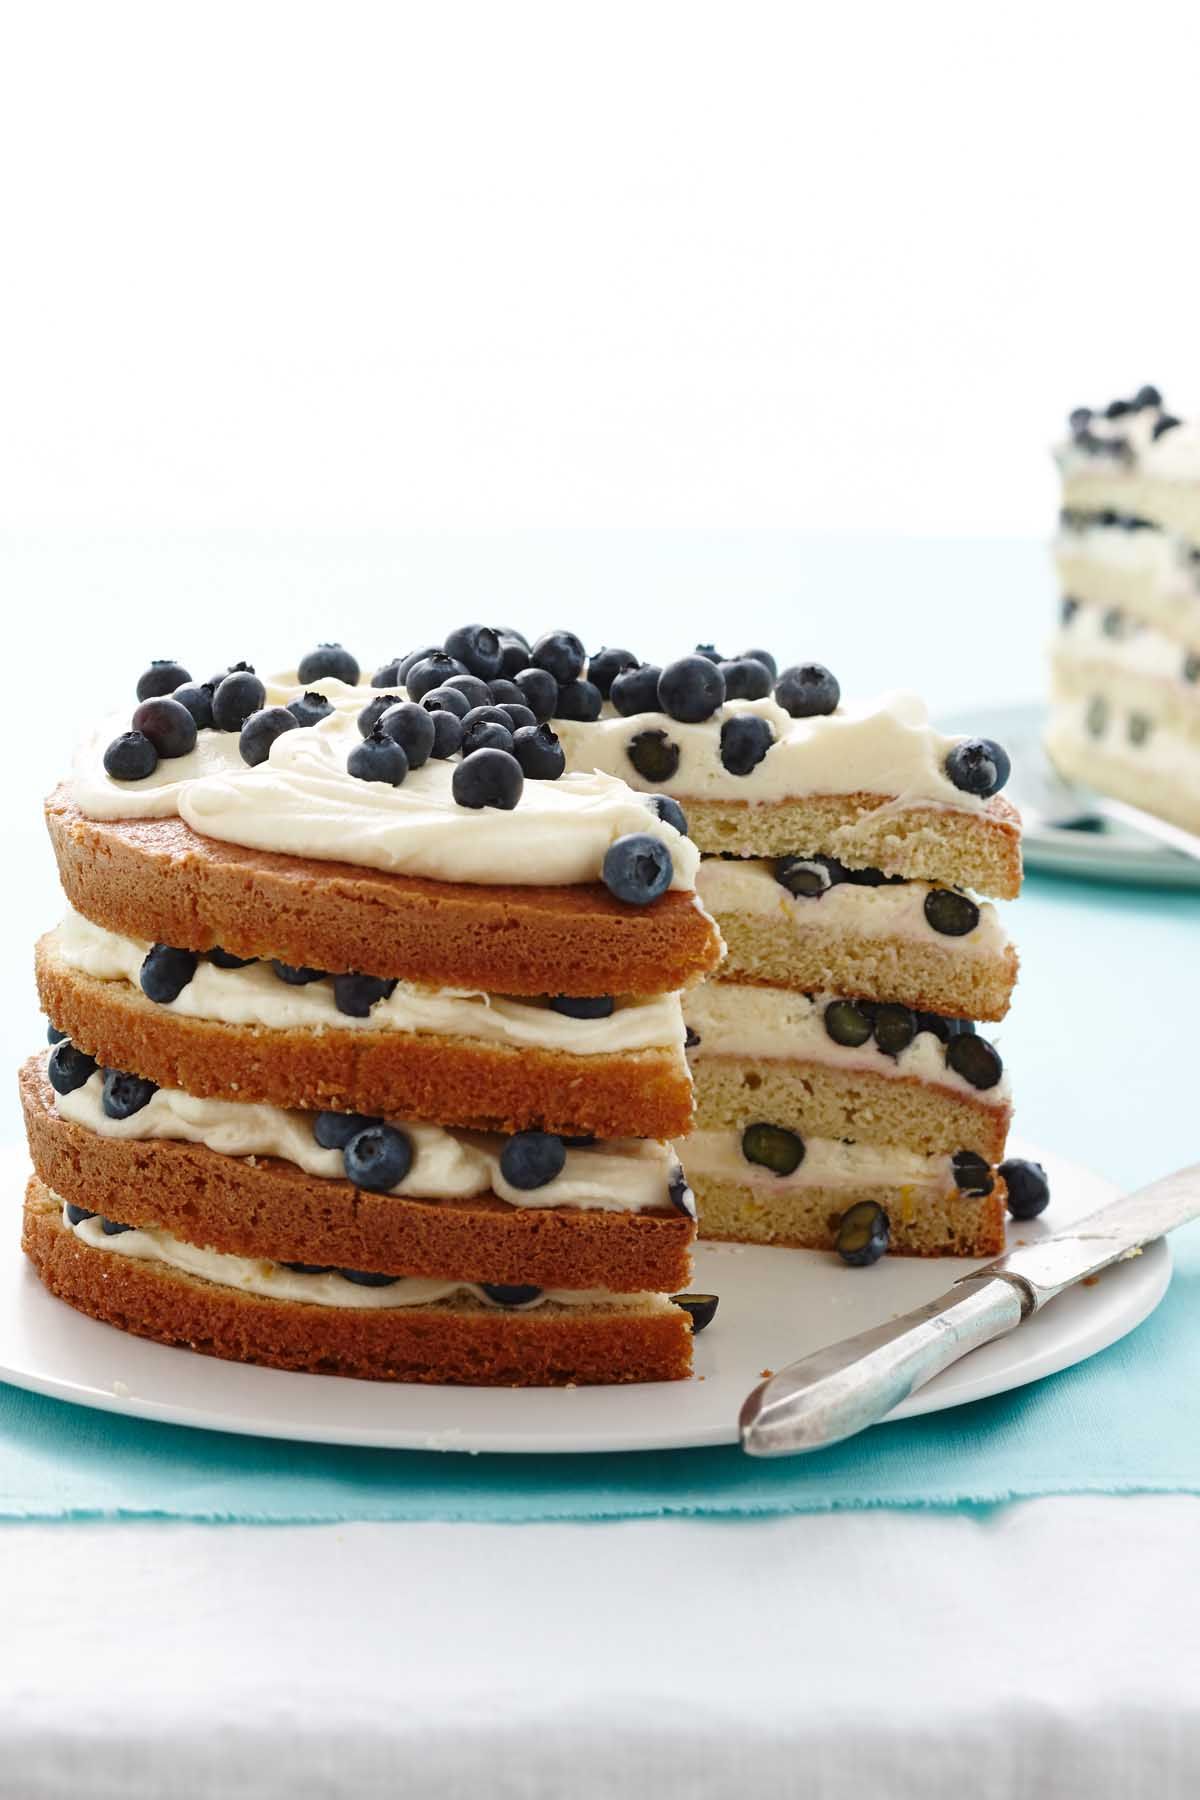 Best Father's Day Cakes - Top 10 Cake Recipes